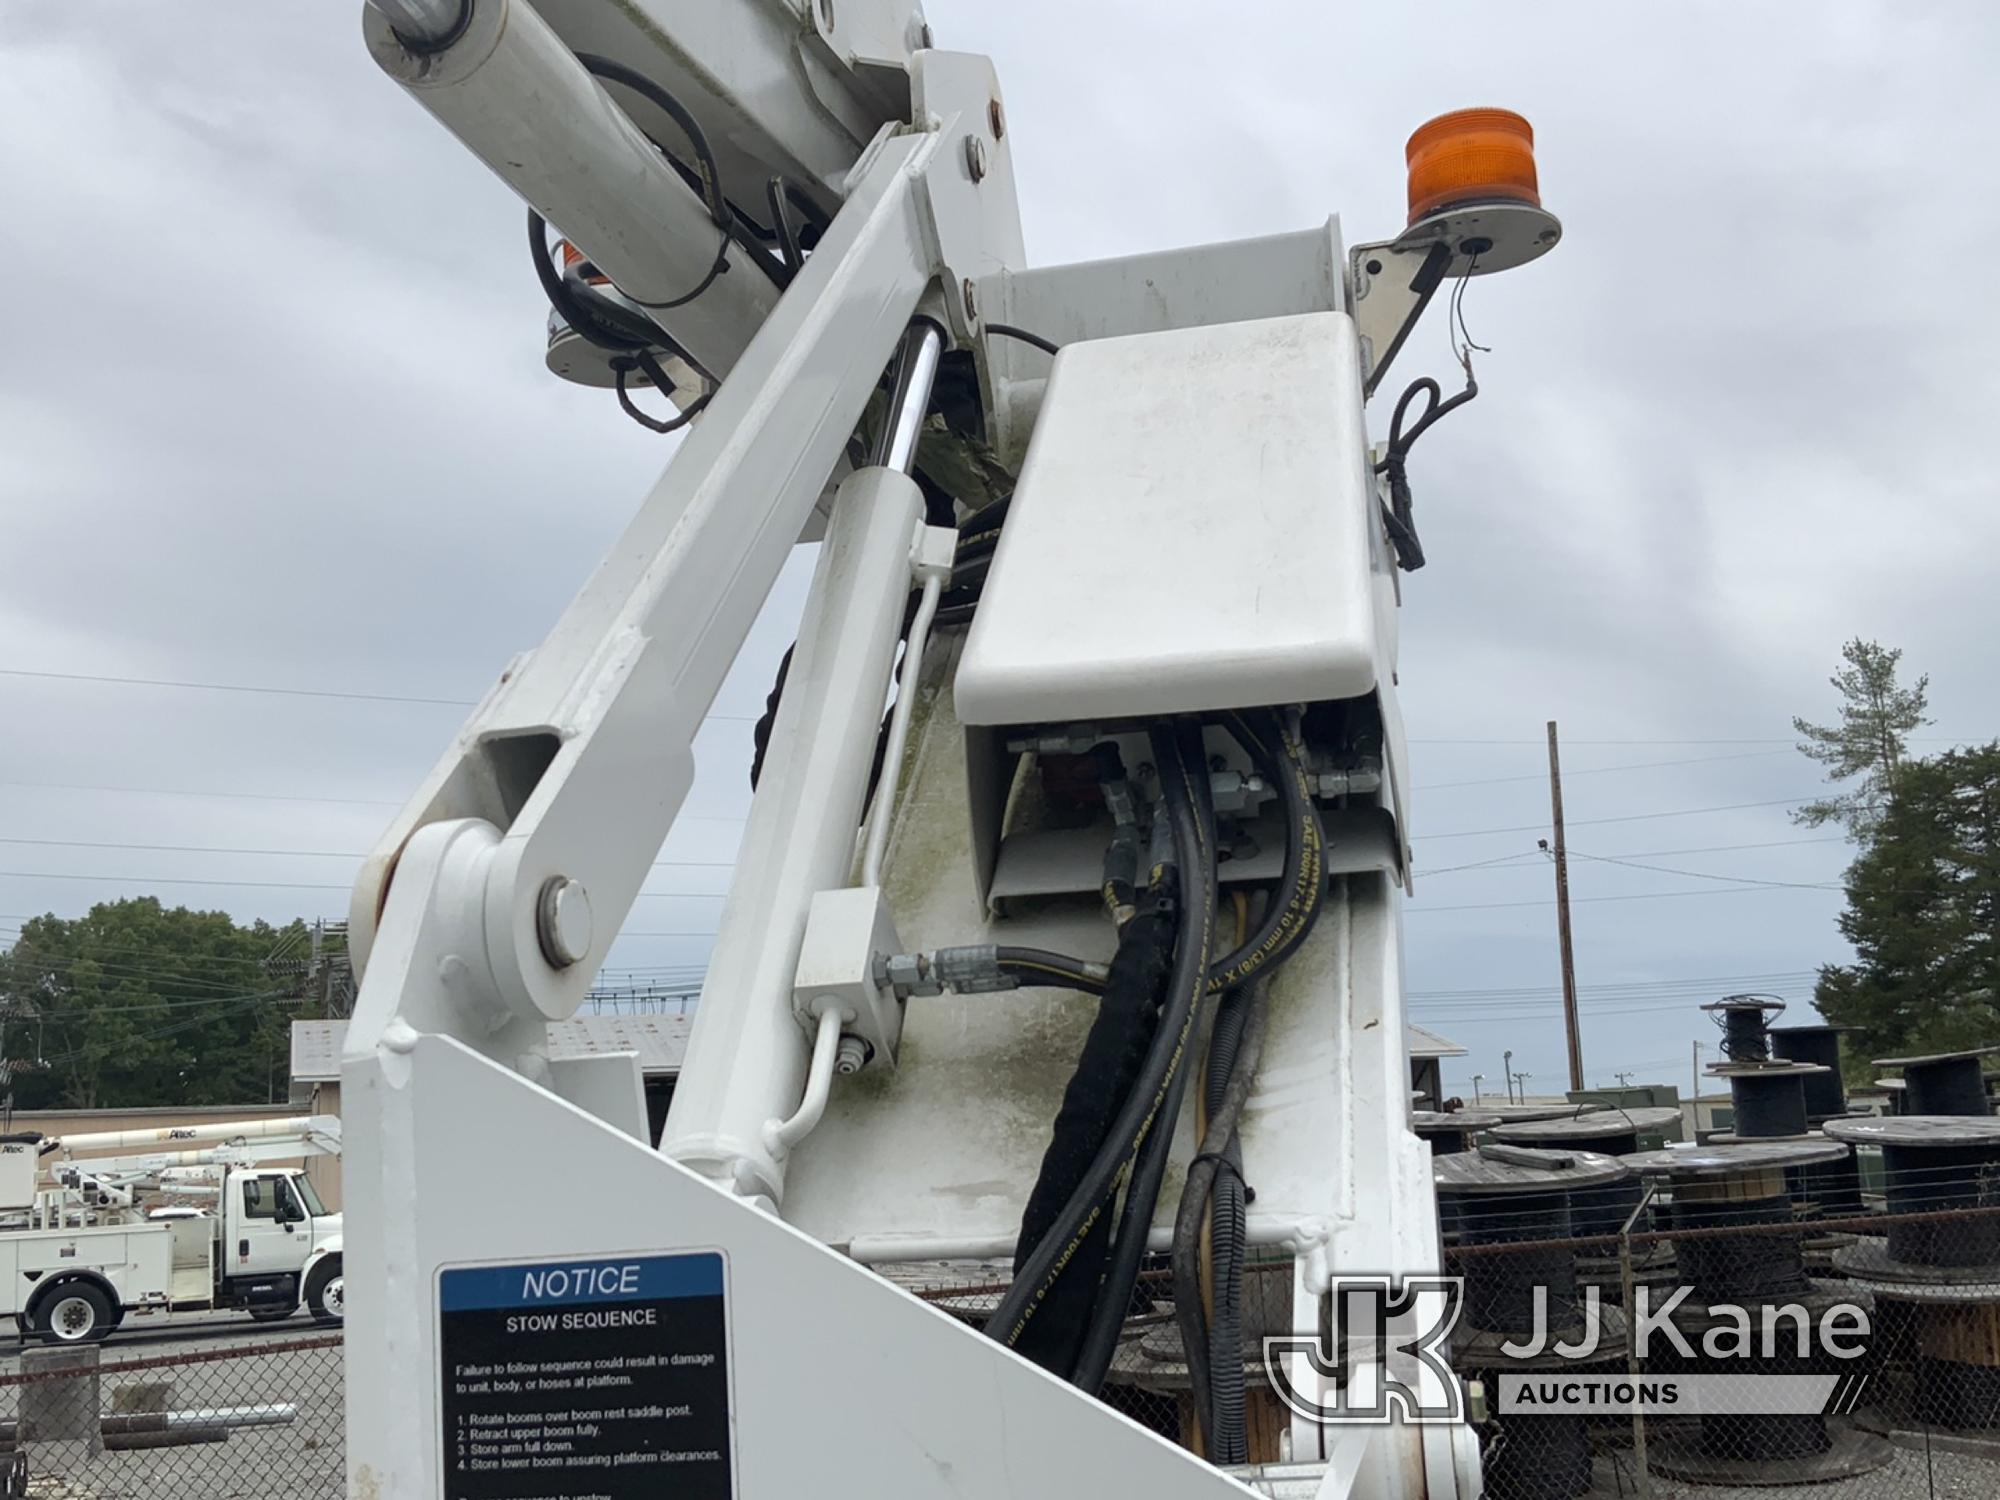 (New Tazewell, TN) Altec AT235, Non-Insulated Bucket Truck mounted behind cab on 2019 Ford F450 Serv